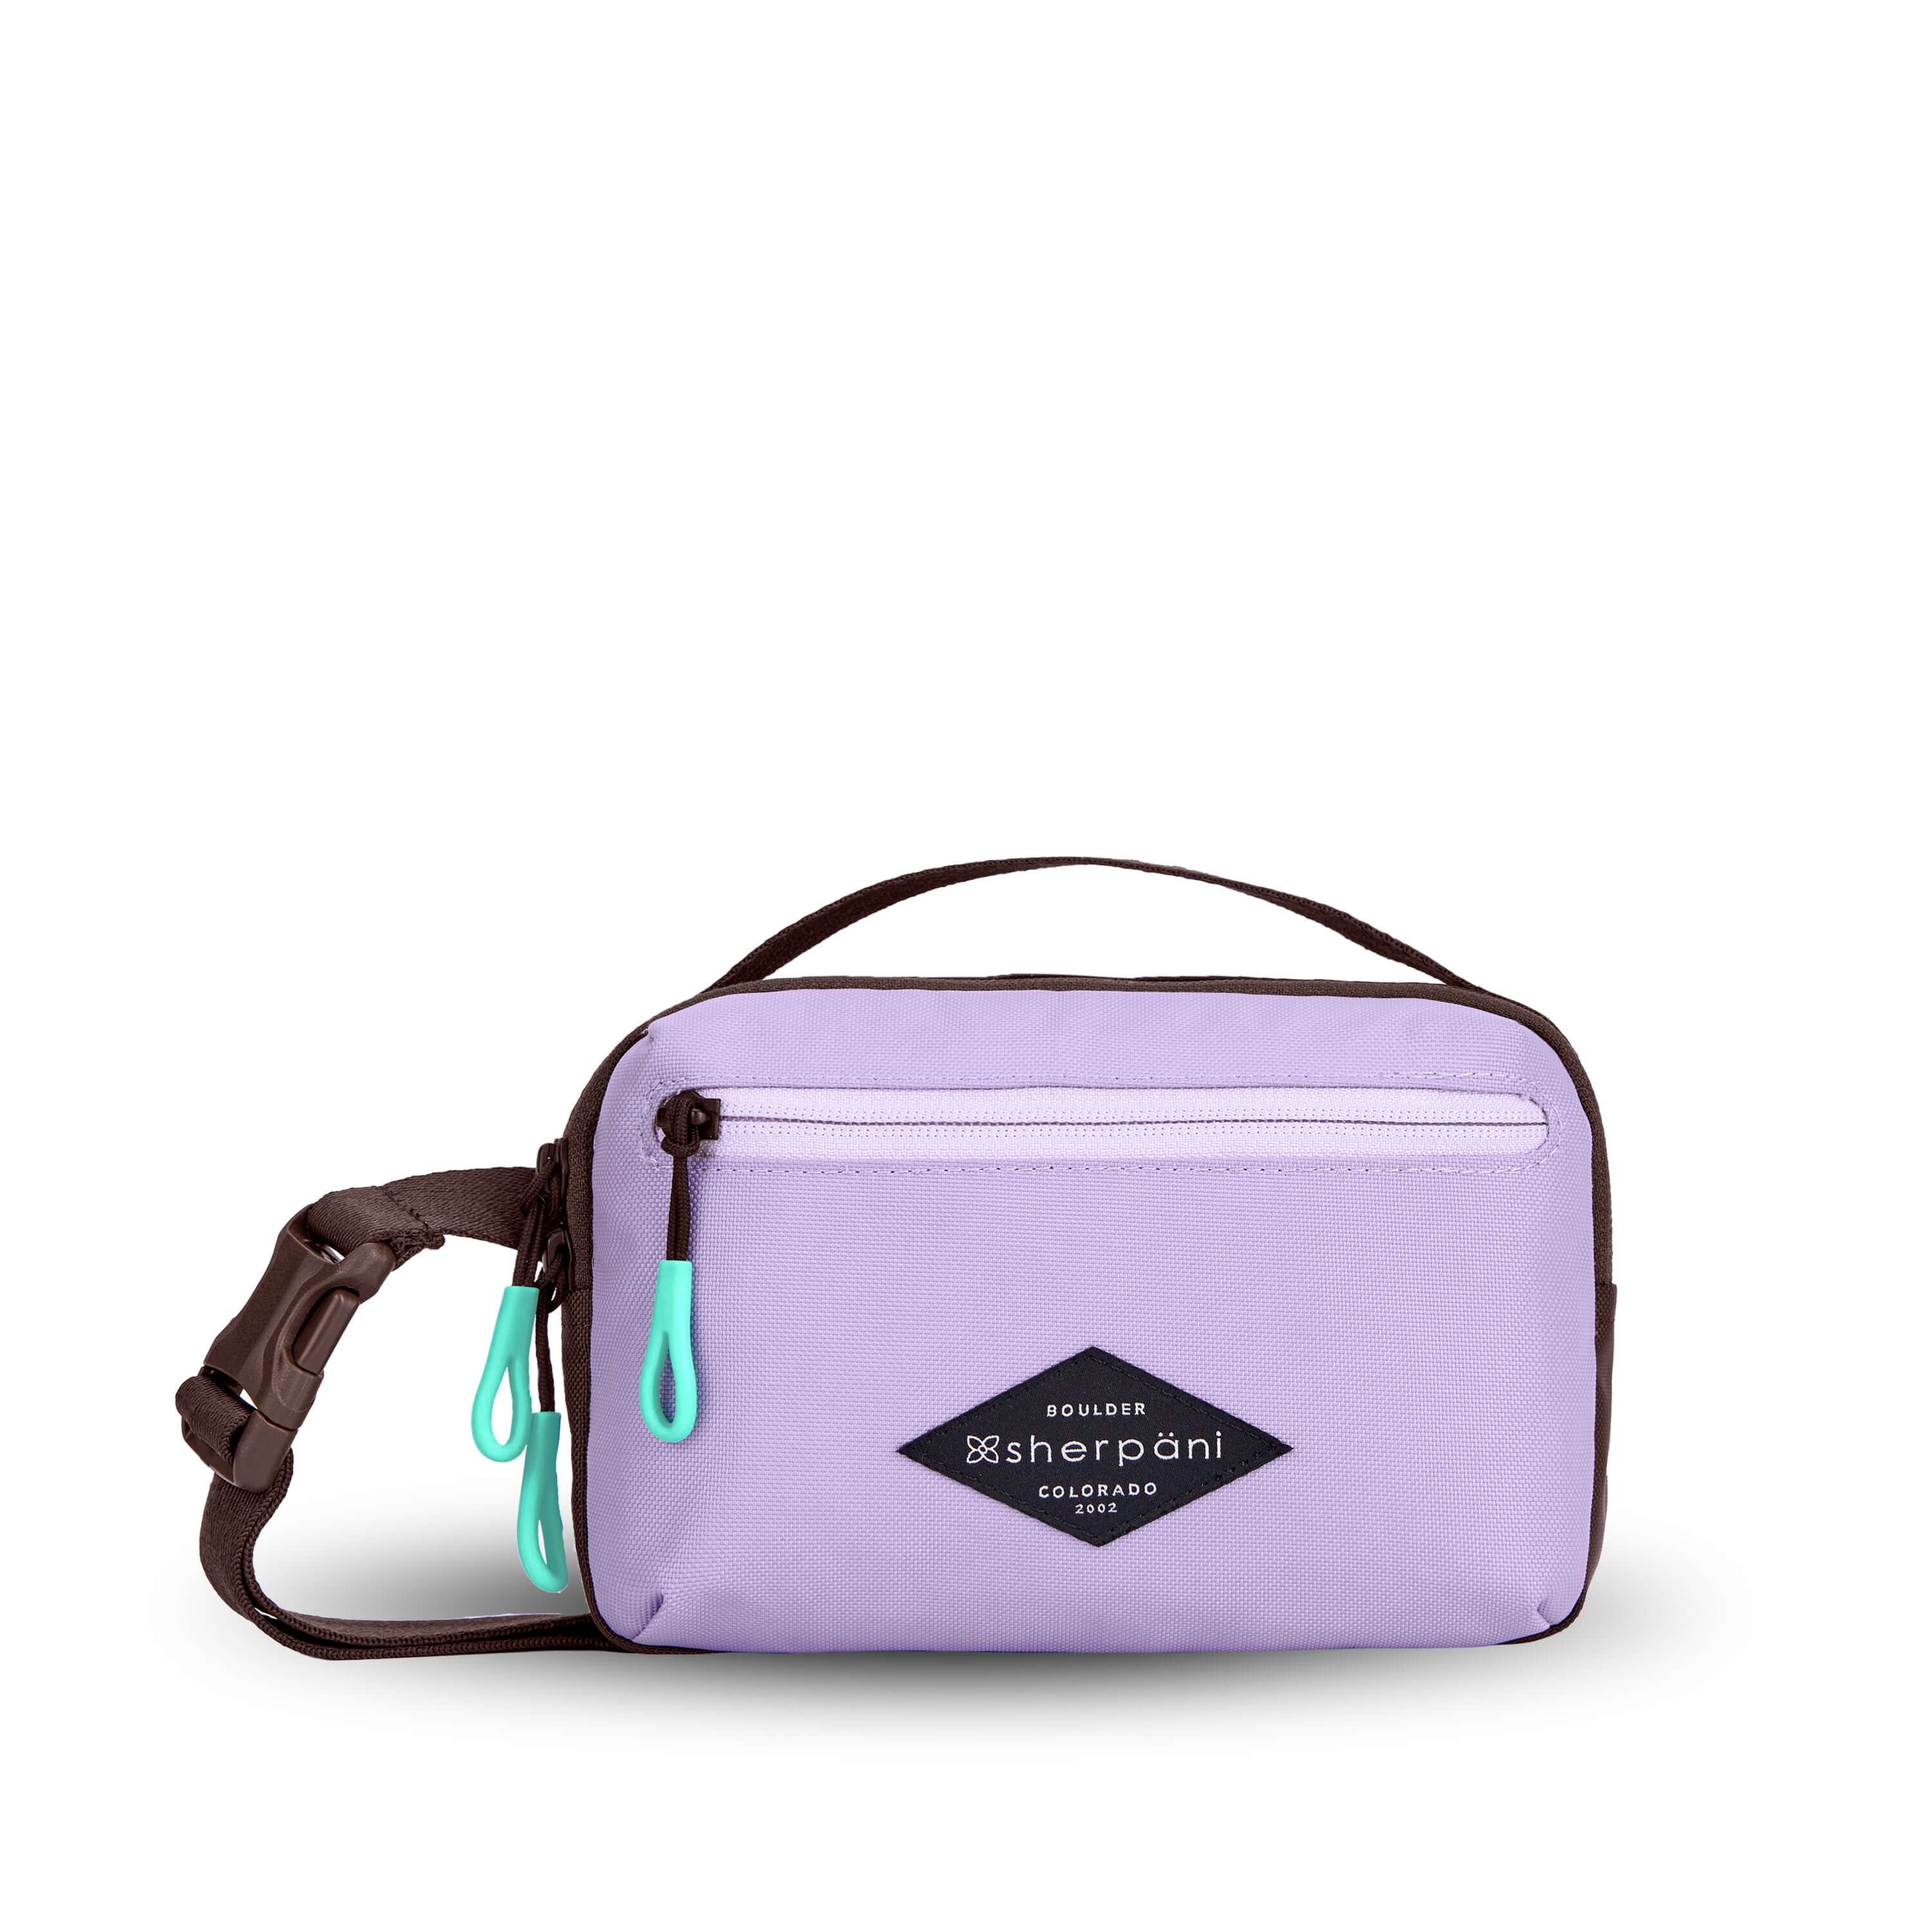 Flat front view of Sherpani’s fanny pack, the Hyk in Lavender. The bag is two-toned, the front half is lavender and the back half is brown. There is an external zipper pocket on the front of the bag. Easy-pull zippers are accented in aqua. The fanny pack features an adjustable strap with a buckle.